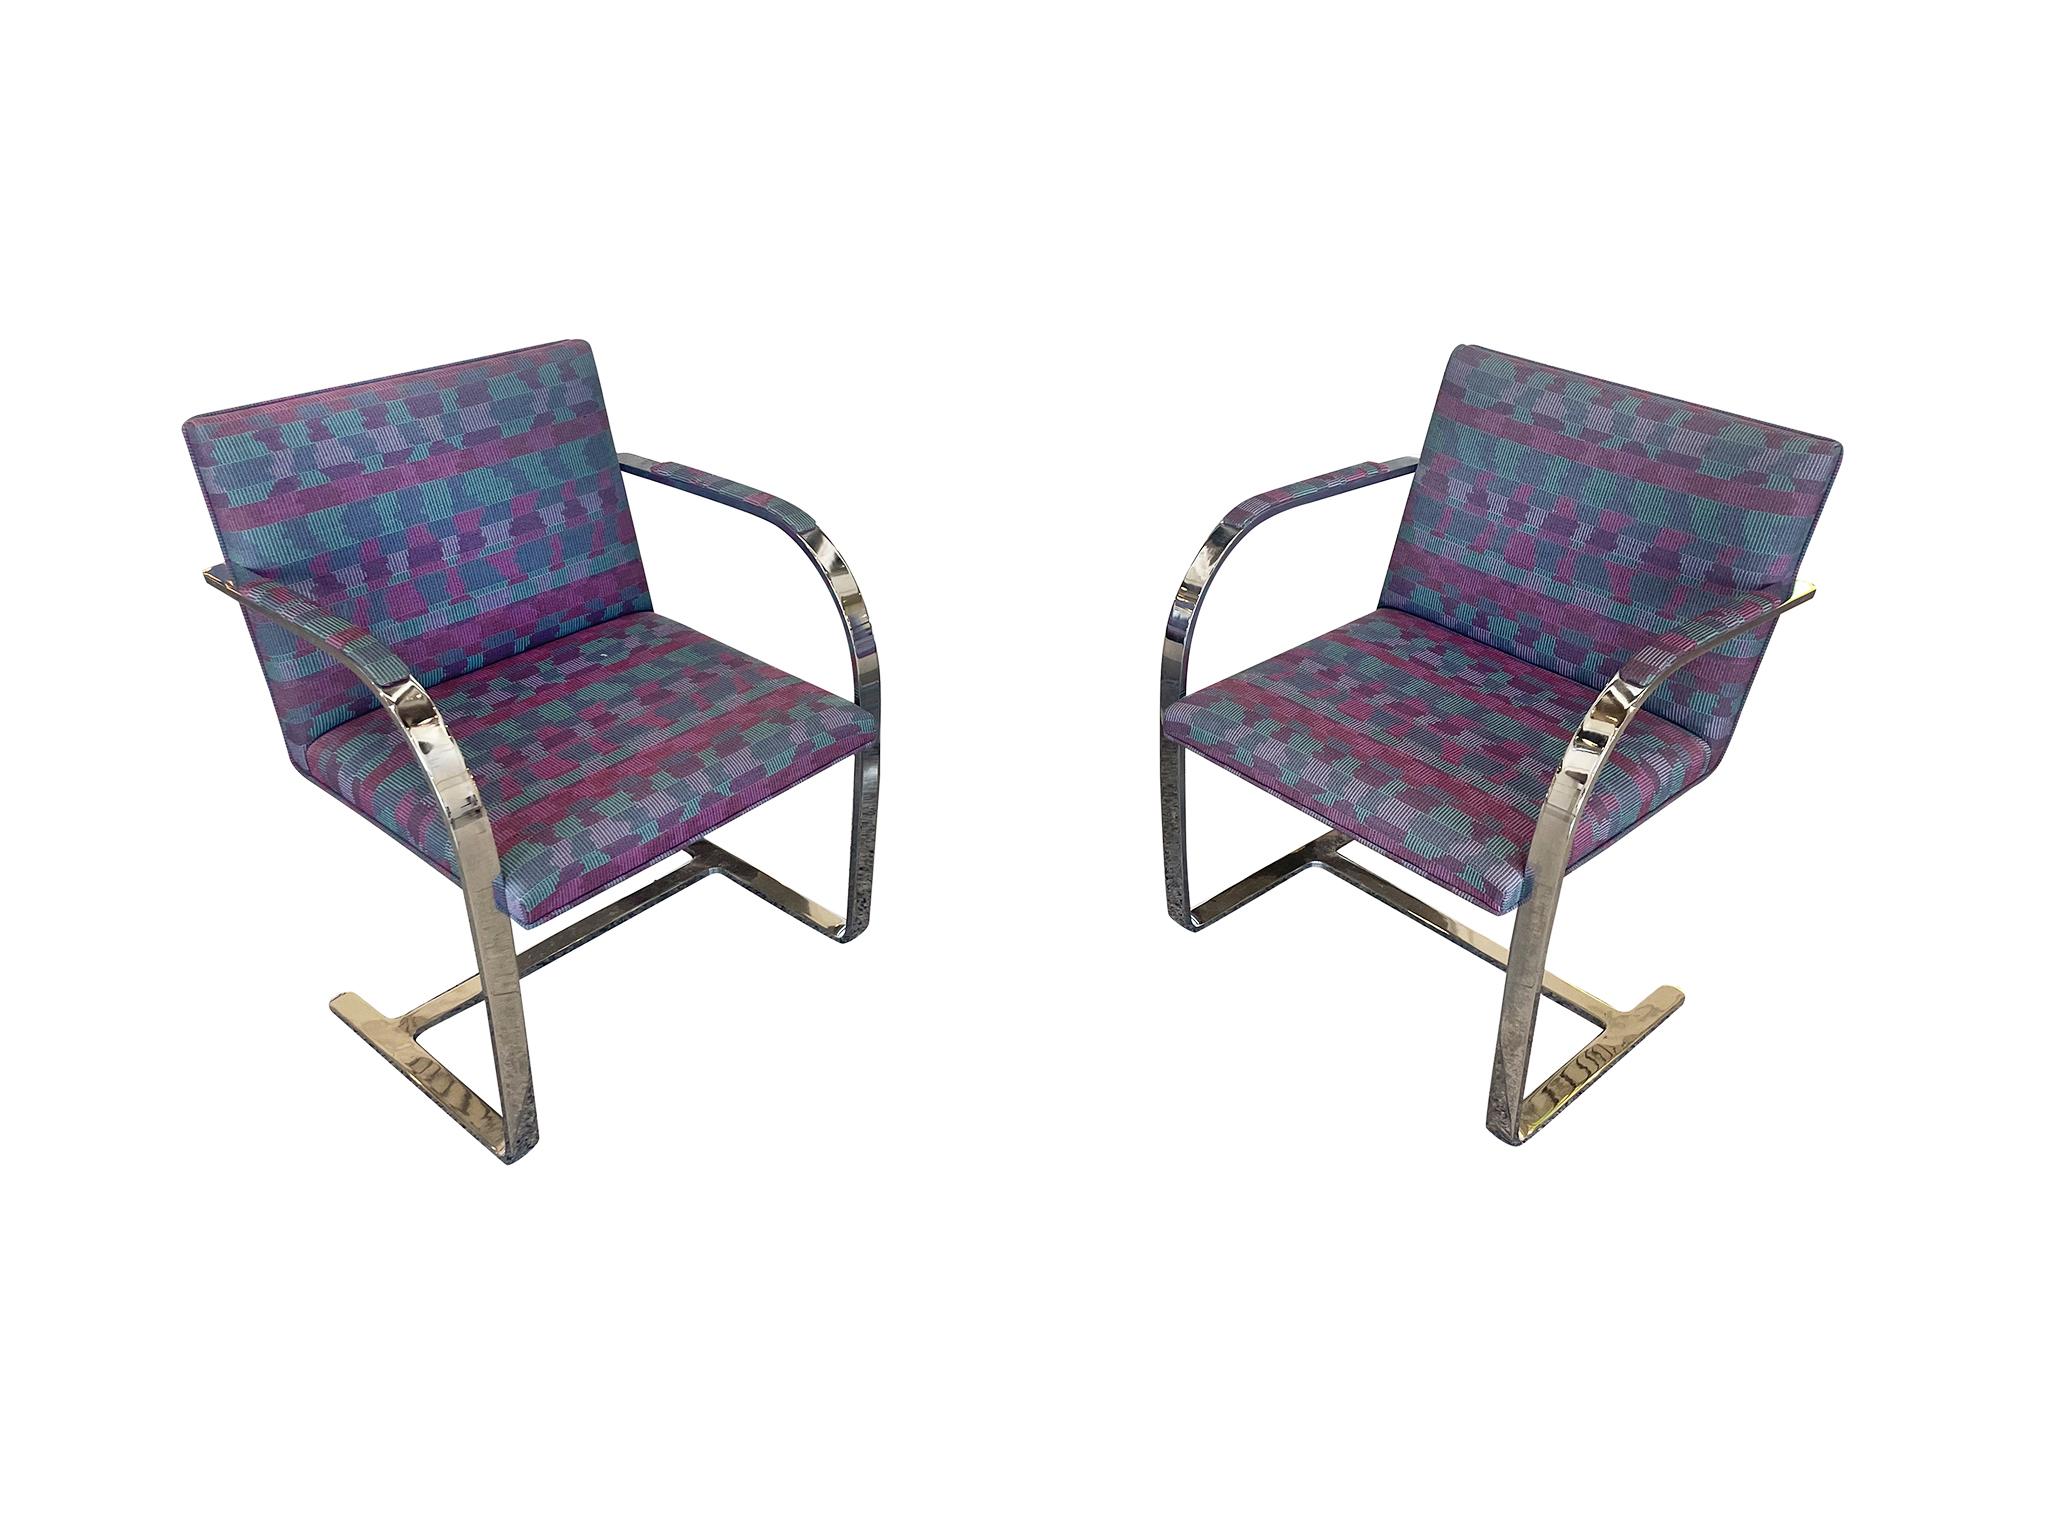 Late 20th Century 1980s Chrome Chairs Attributed to Ludwig Mies van der Rohe, a Set of 8